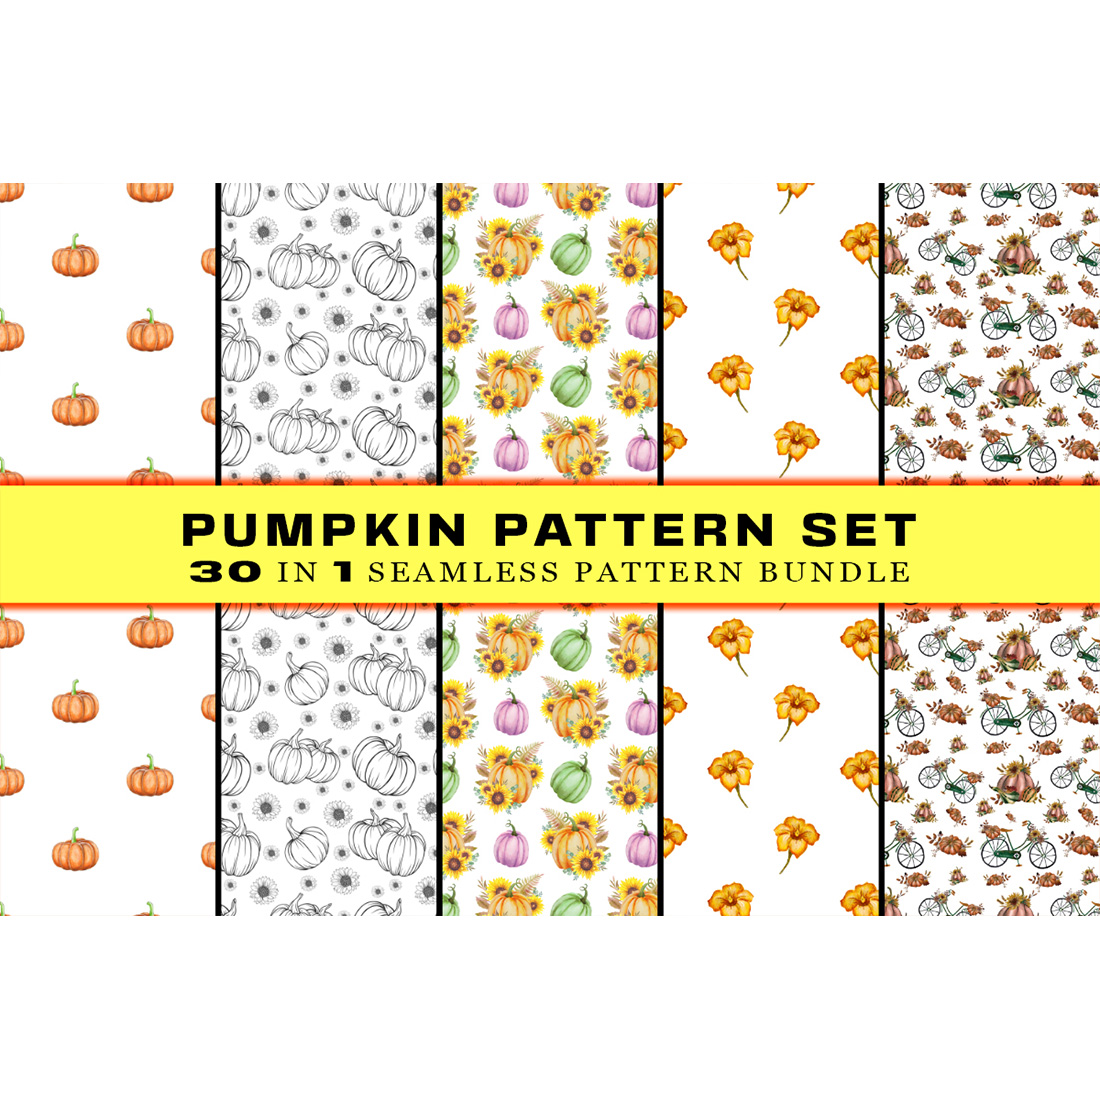 Pack of images of charming patterns with pumpkin